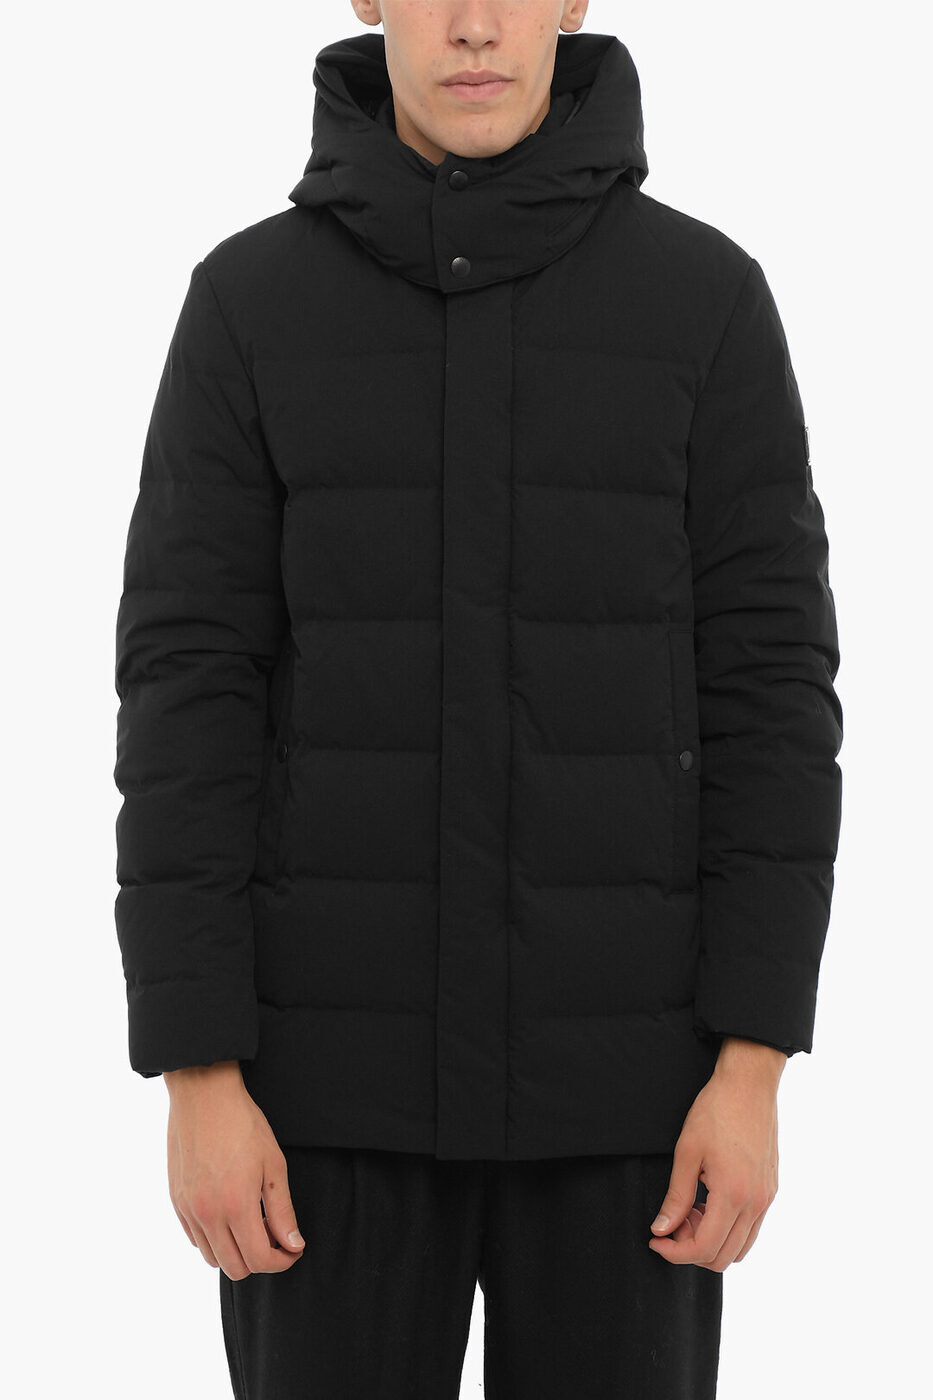 WOOLRICH ウールリッチ ジャケット COWOLOW0009UT1046 100 メンズ SOLID COLOR SIERRA LONG DOWN JACKET WITH REMOVABLE HOOD AND 【関税・送料無料】【ラッピング無料】 dk